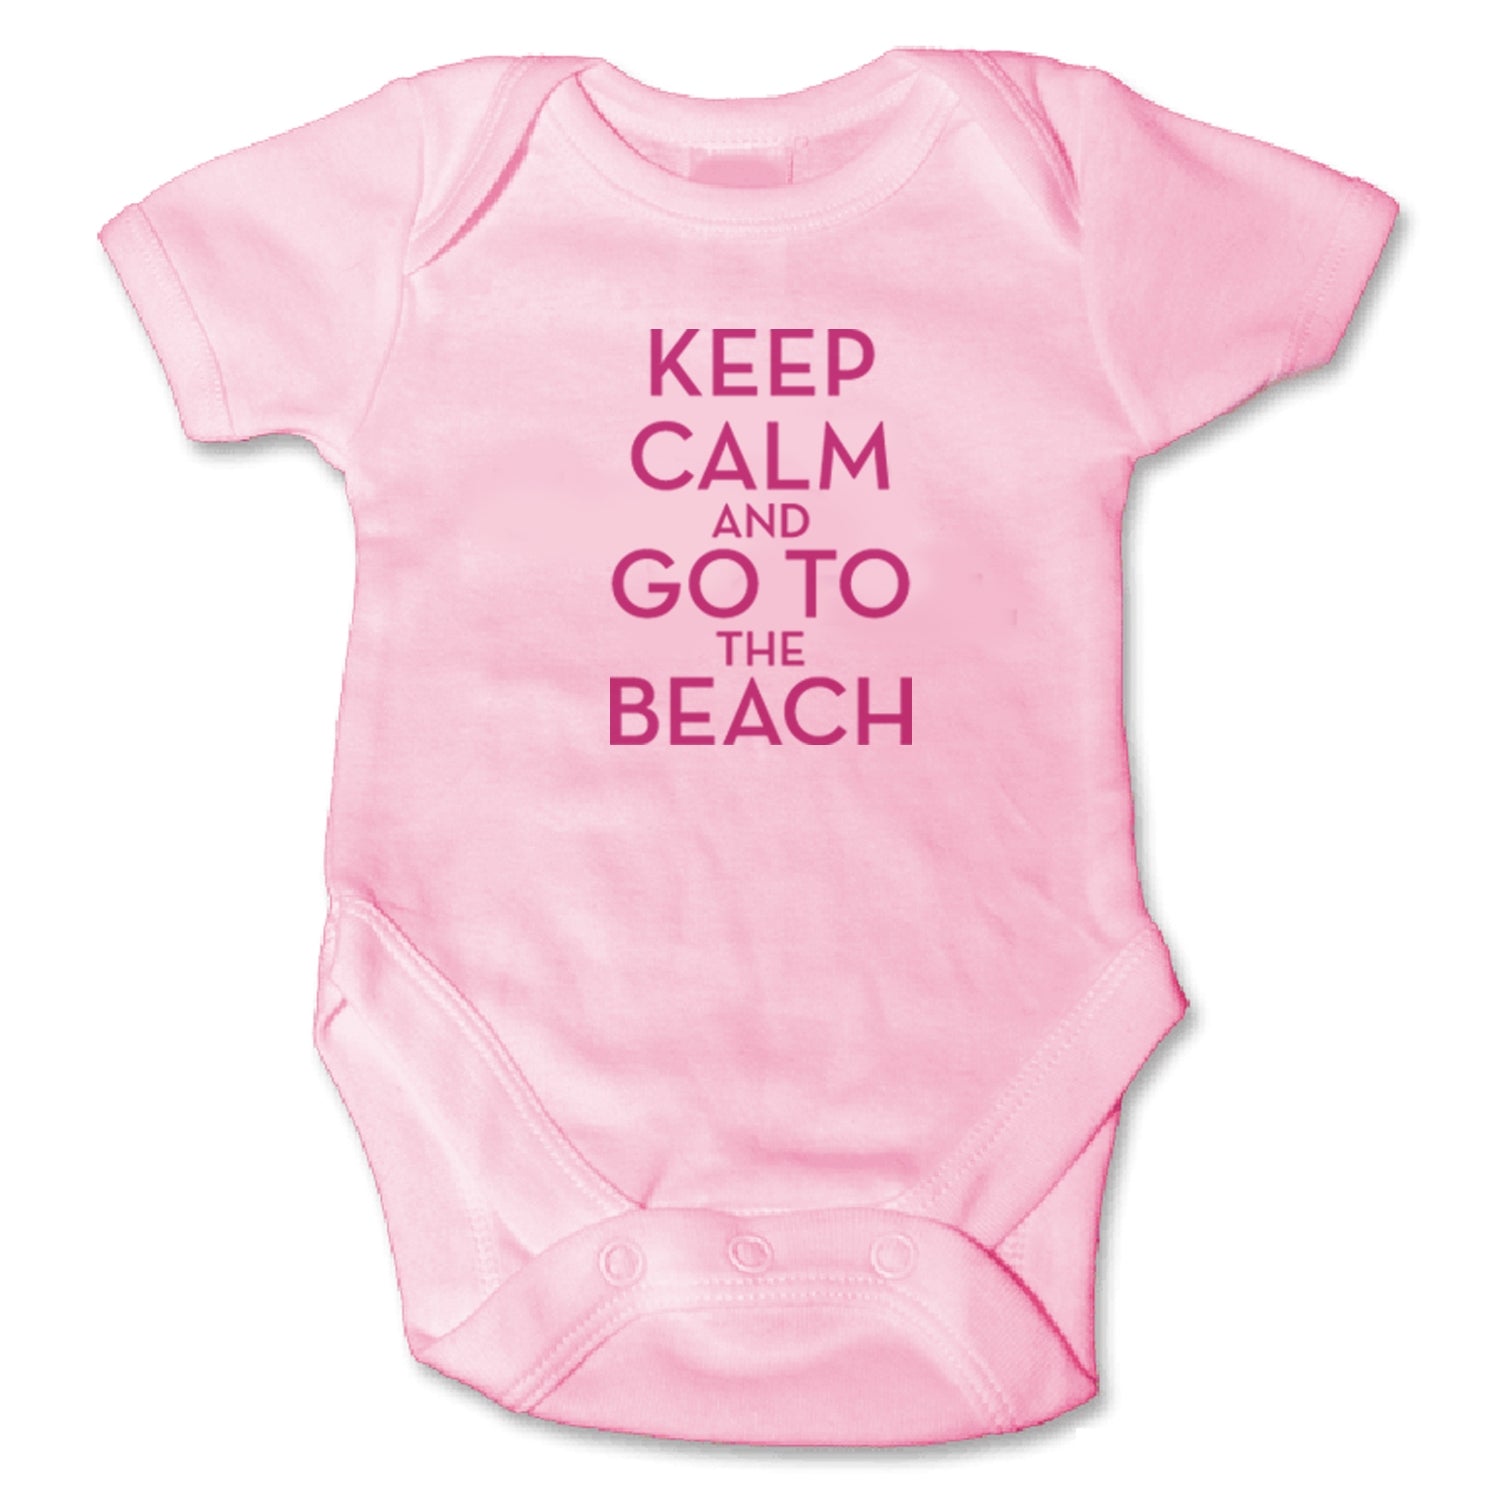 Sol Baby Keep Calm and Go To The Beach Pink Bodysuit